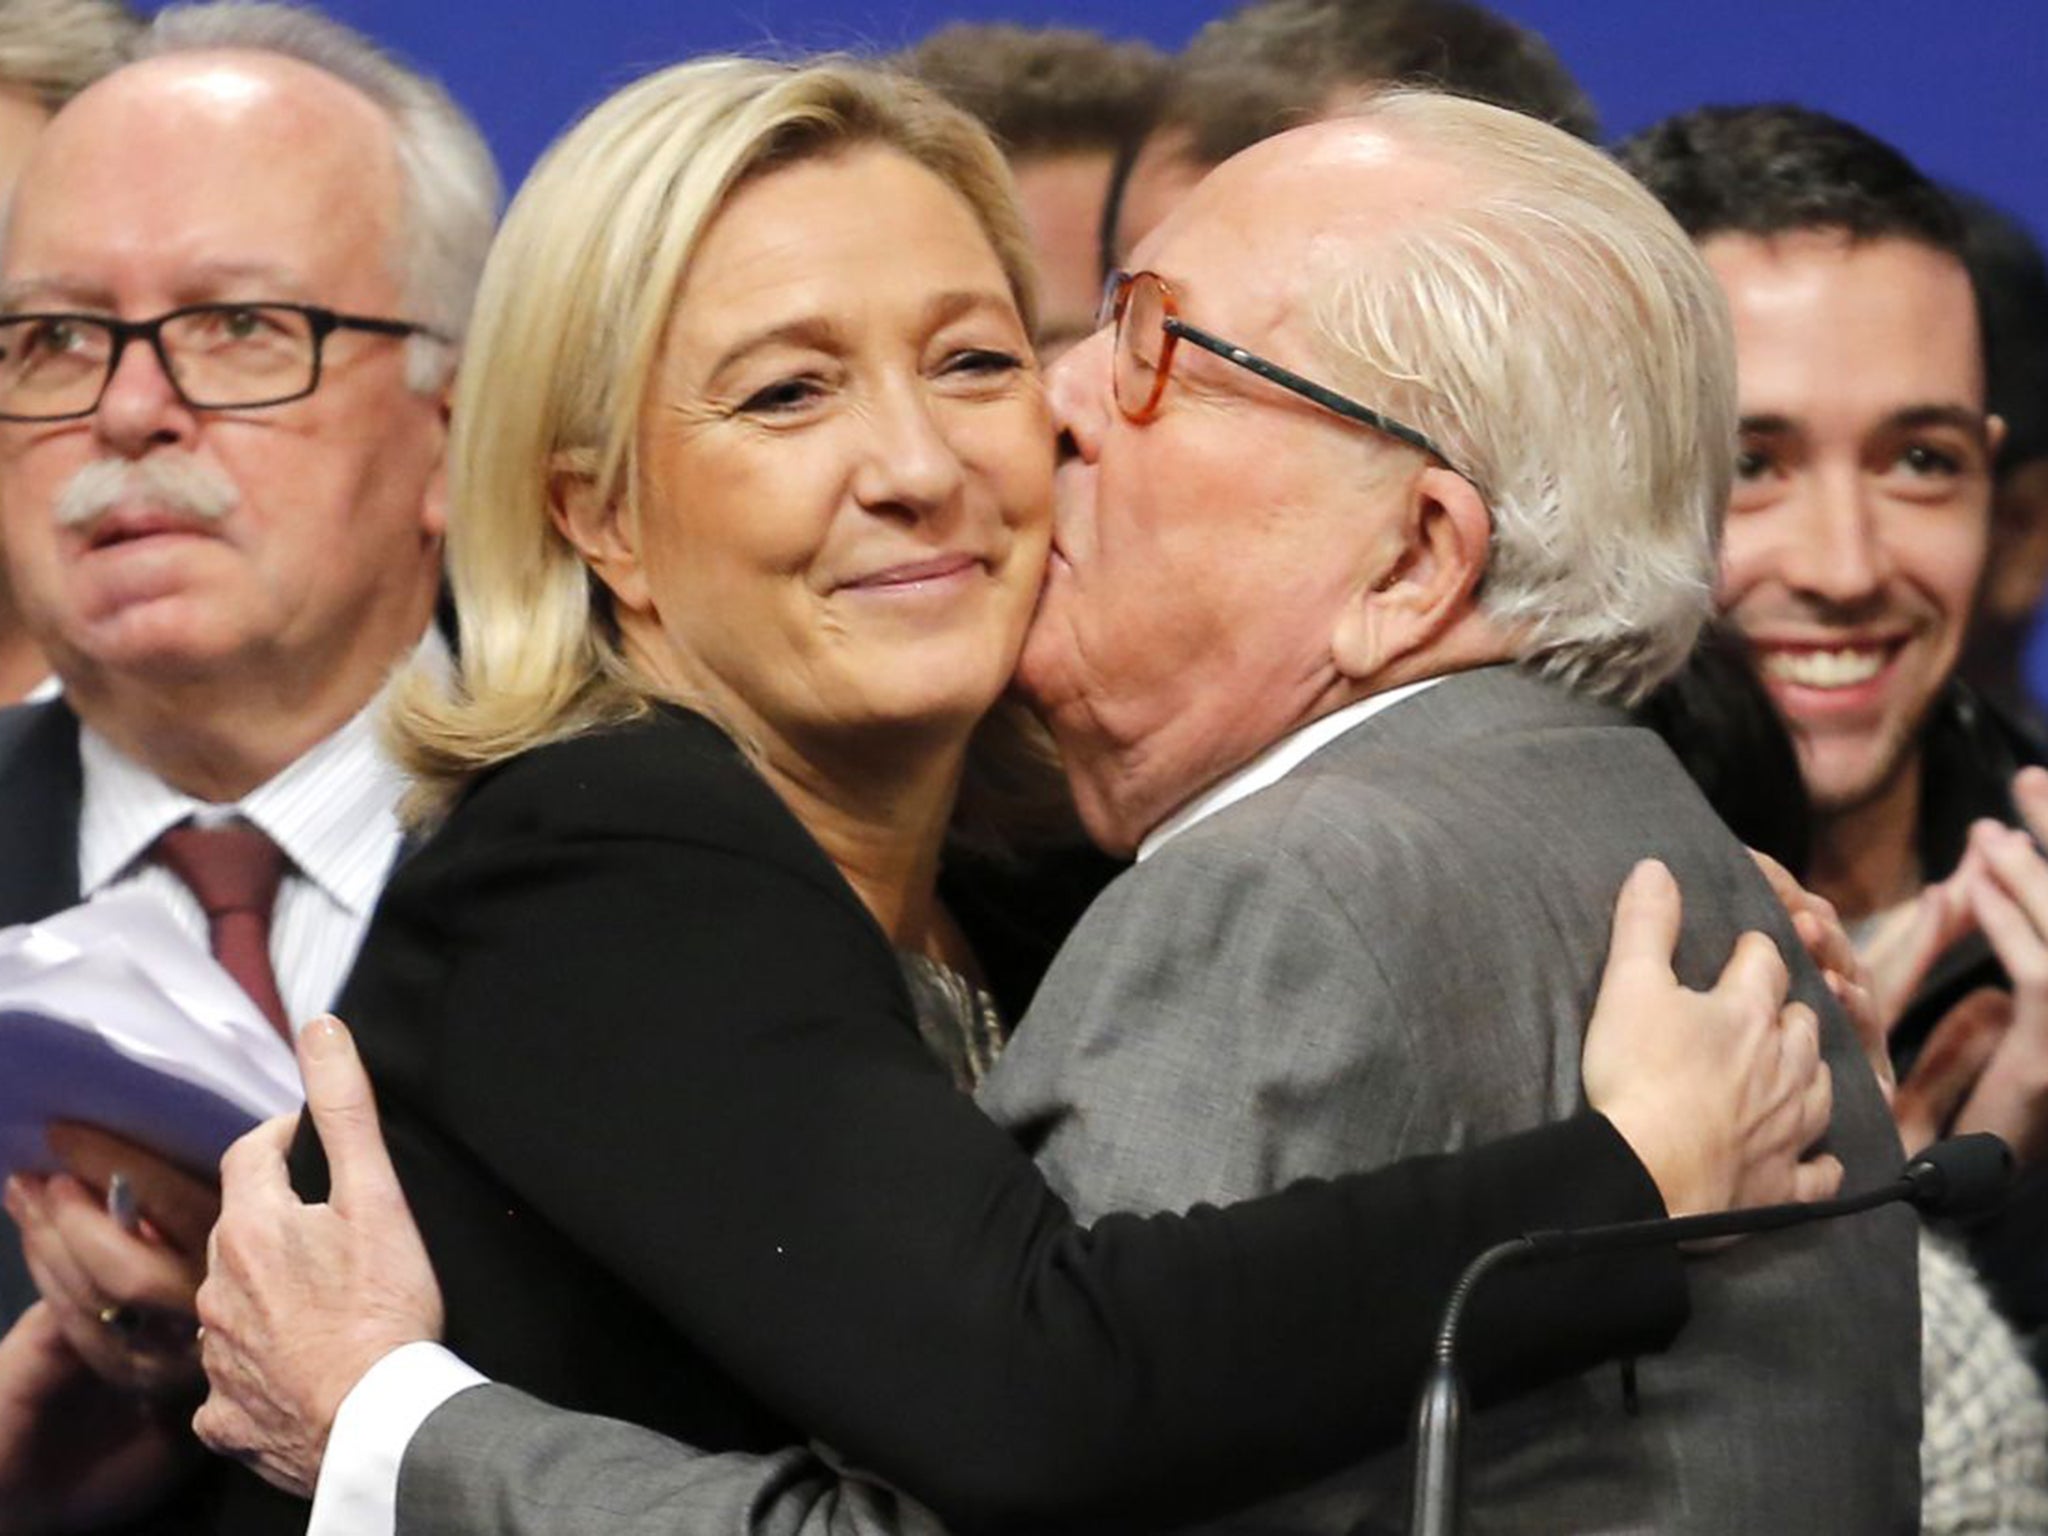 Marine Le Pen, leader of the Front National, with her father, Jean-Marie